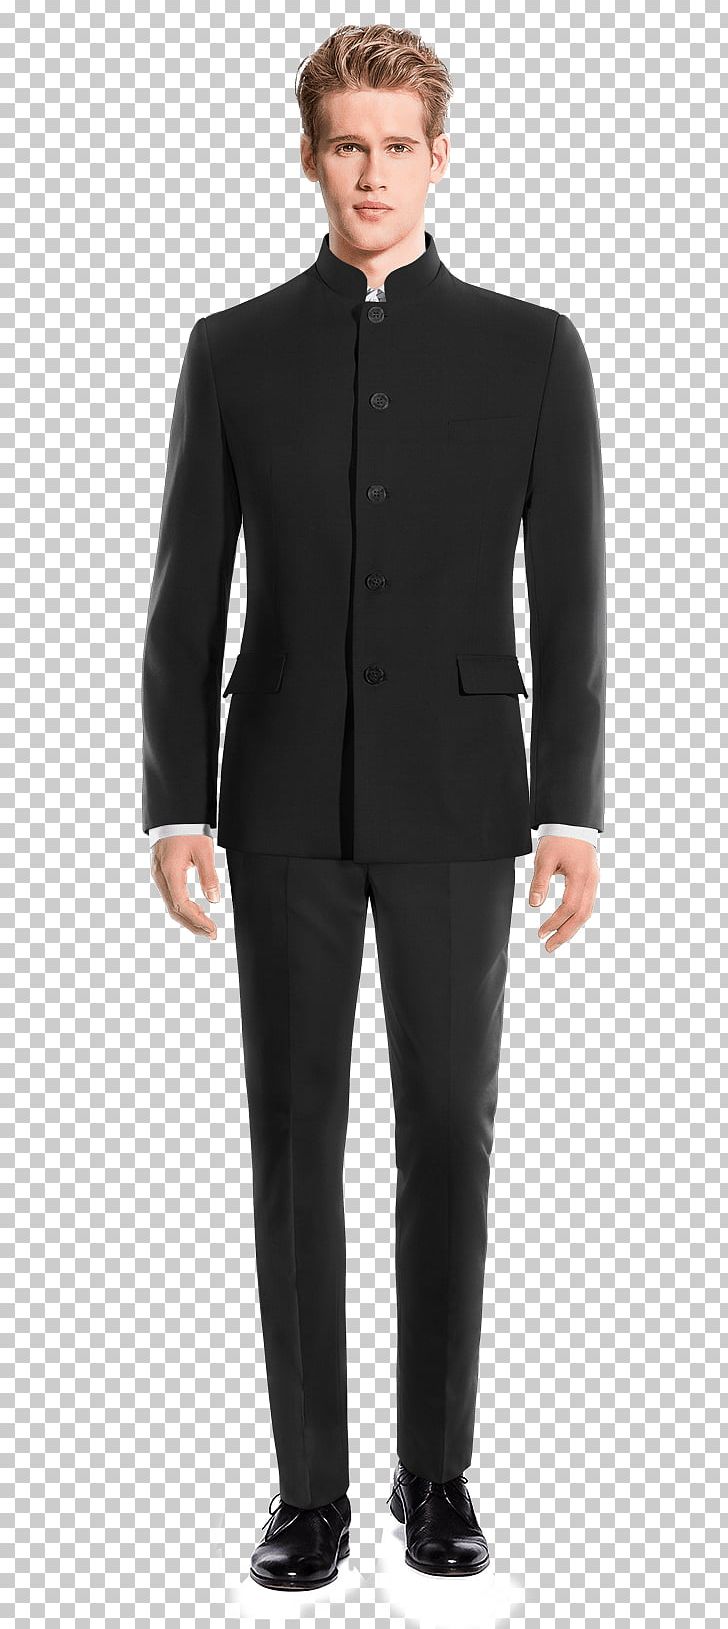 Double-breasted Suit Dress Pants Clothing PNG, Clipart, Blazer, Businessperson, Chino Cloth, Clothing, Coat Free PNG Download